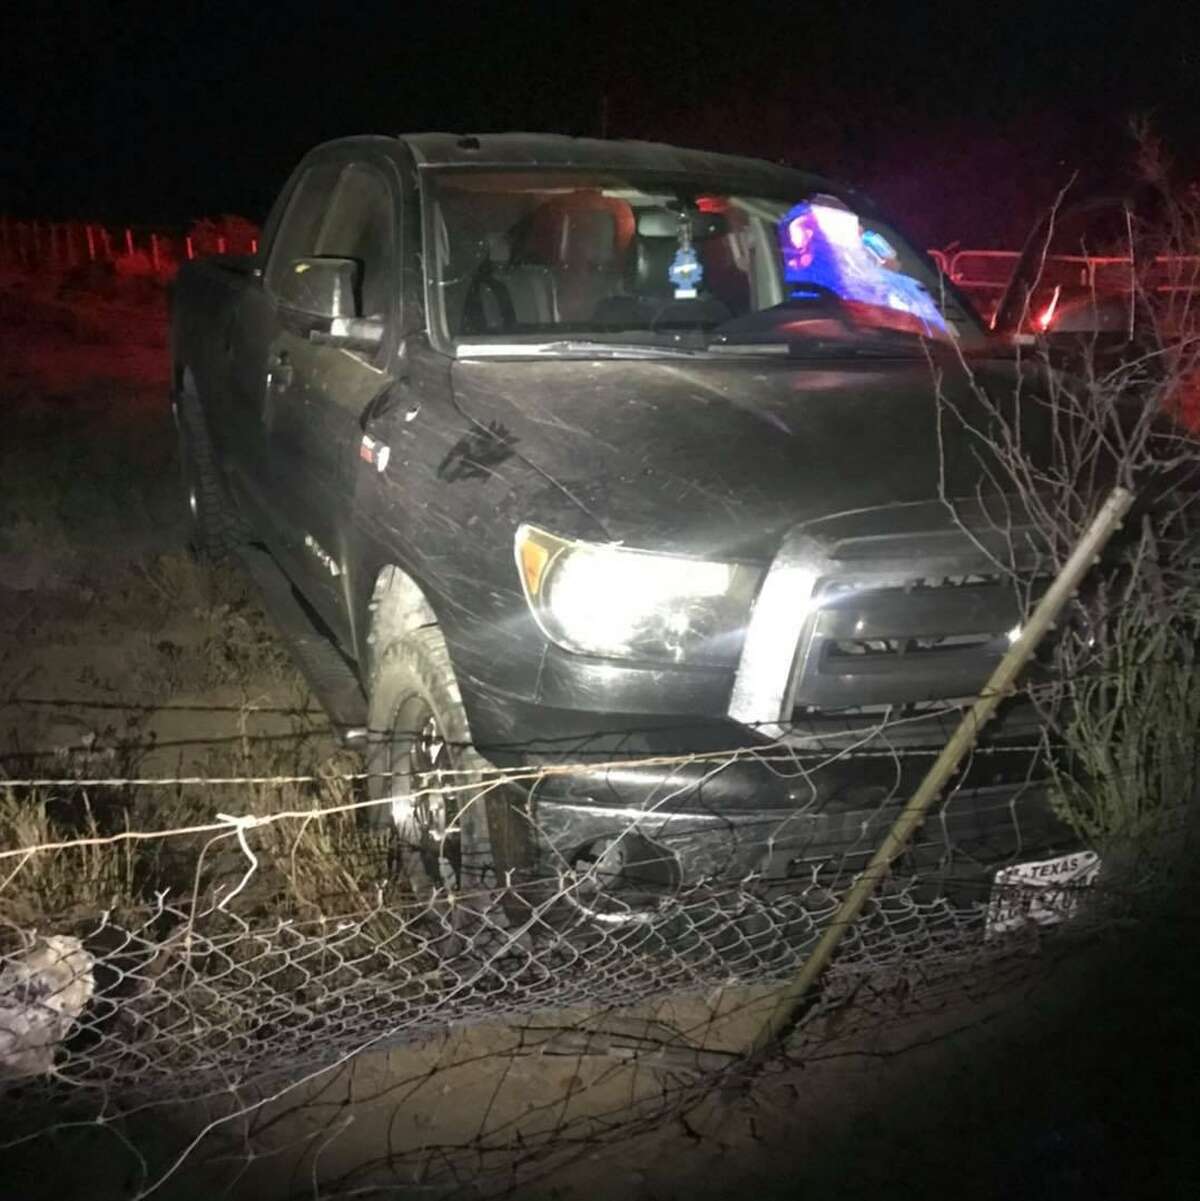 The Zapata County Sheriff’s Office said this vehicle was transporting migrants before leading authorities on a chase and crashing into two fence lines.